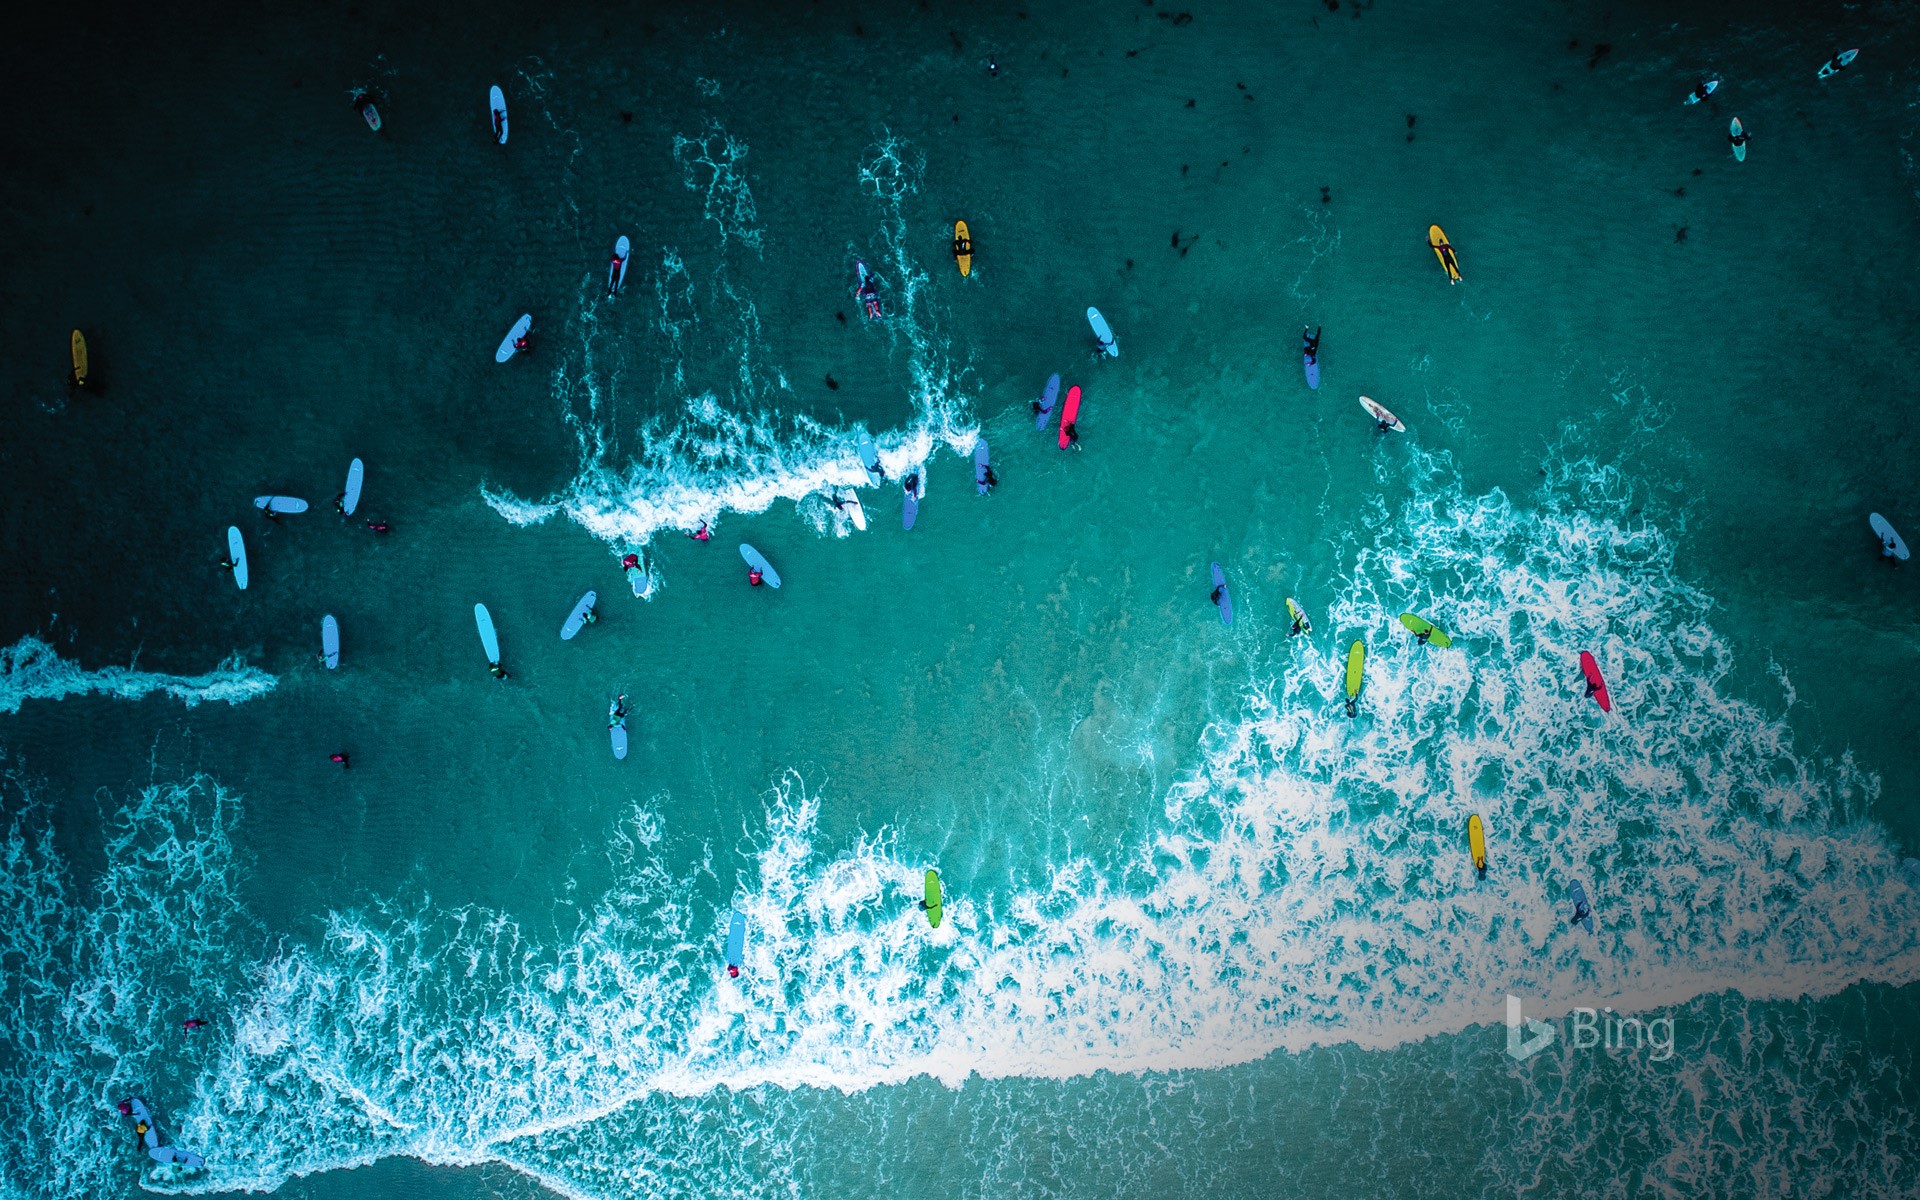 Aerial view of surfers in Cornwall for International Surfing Day